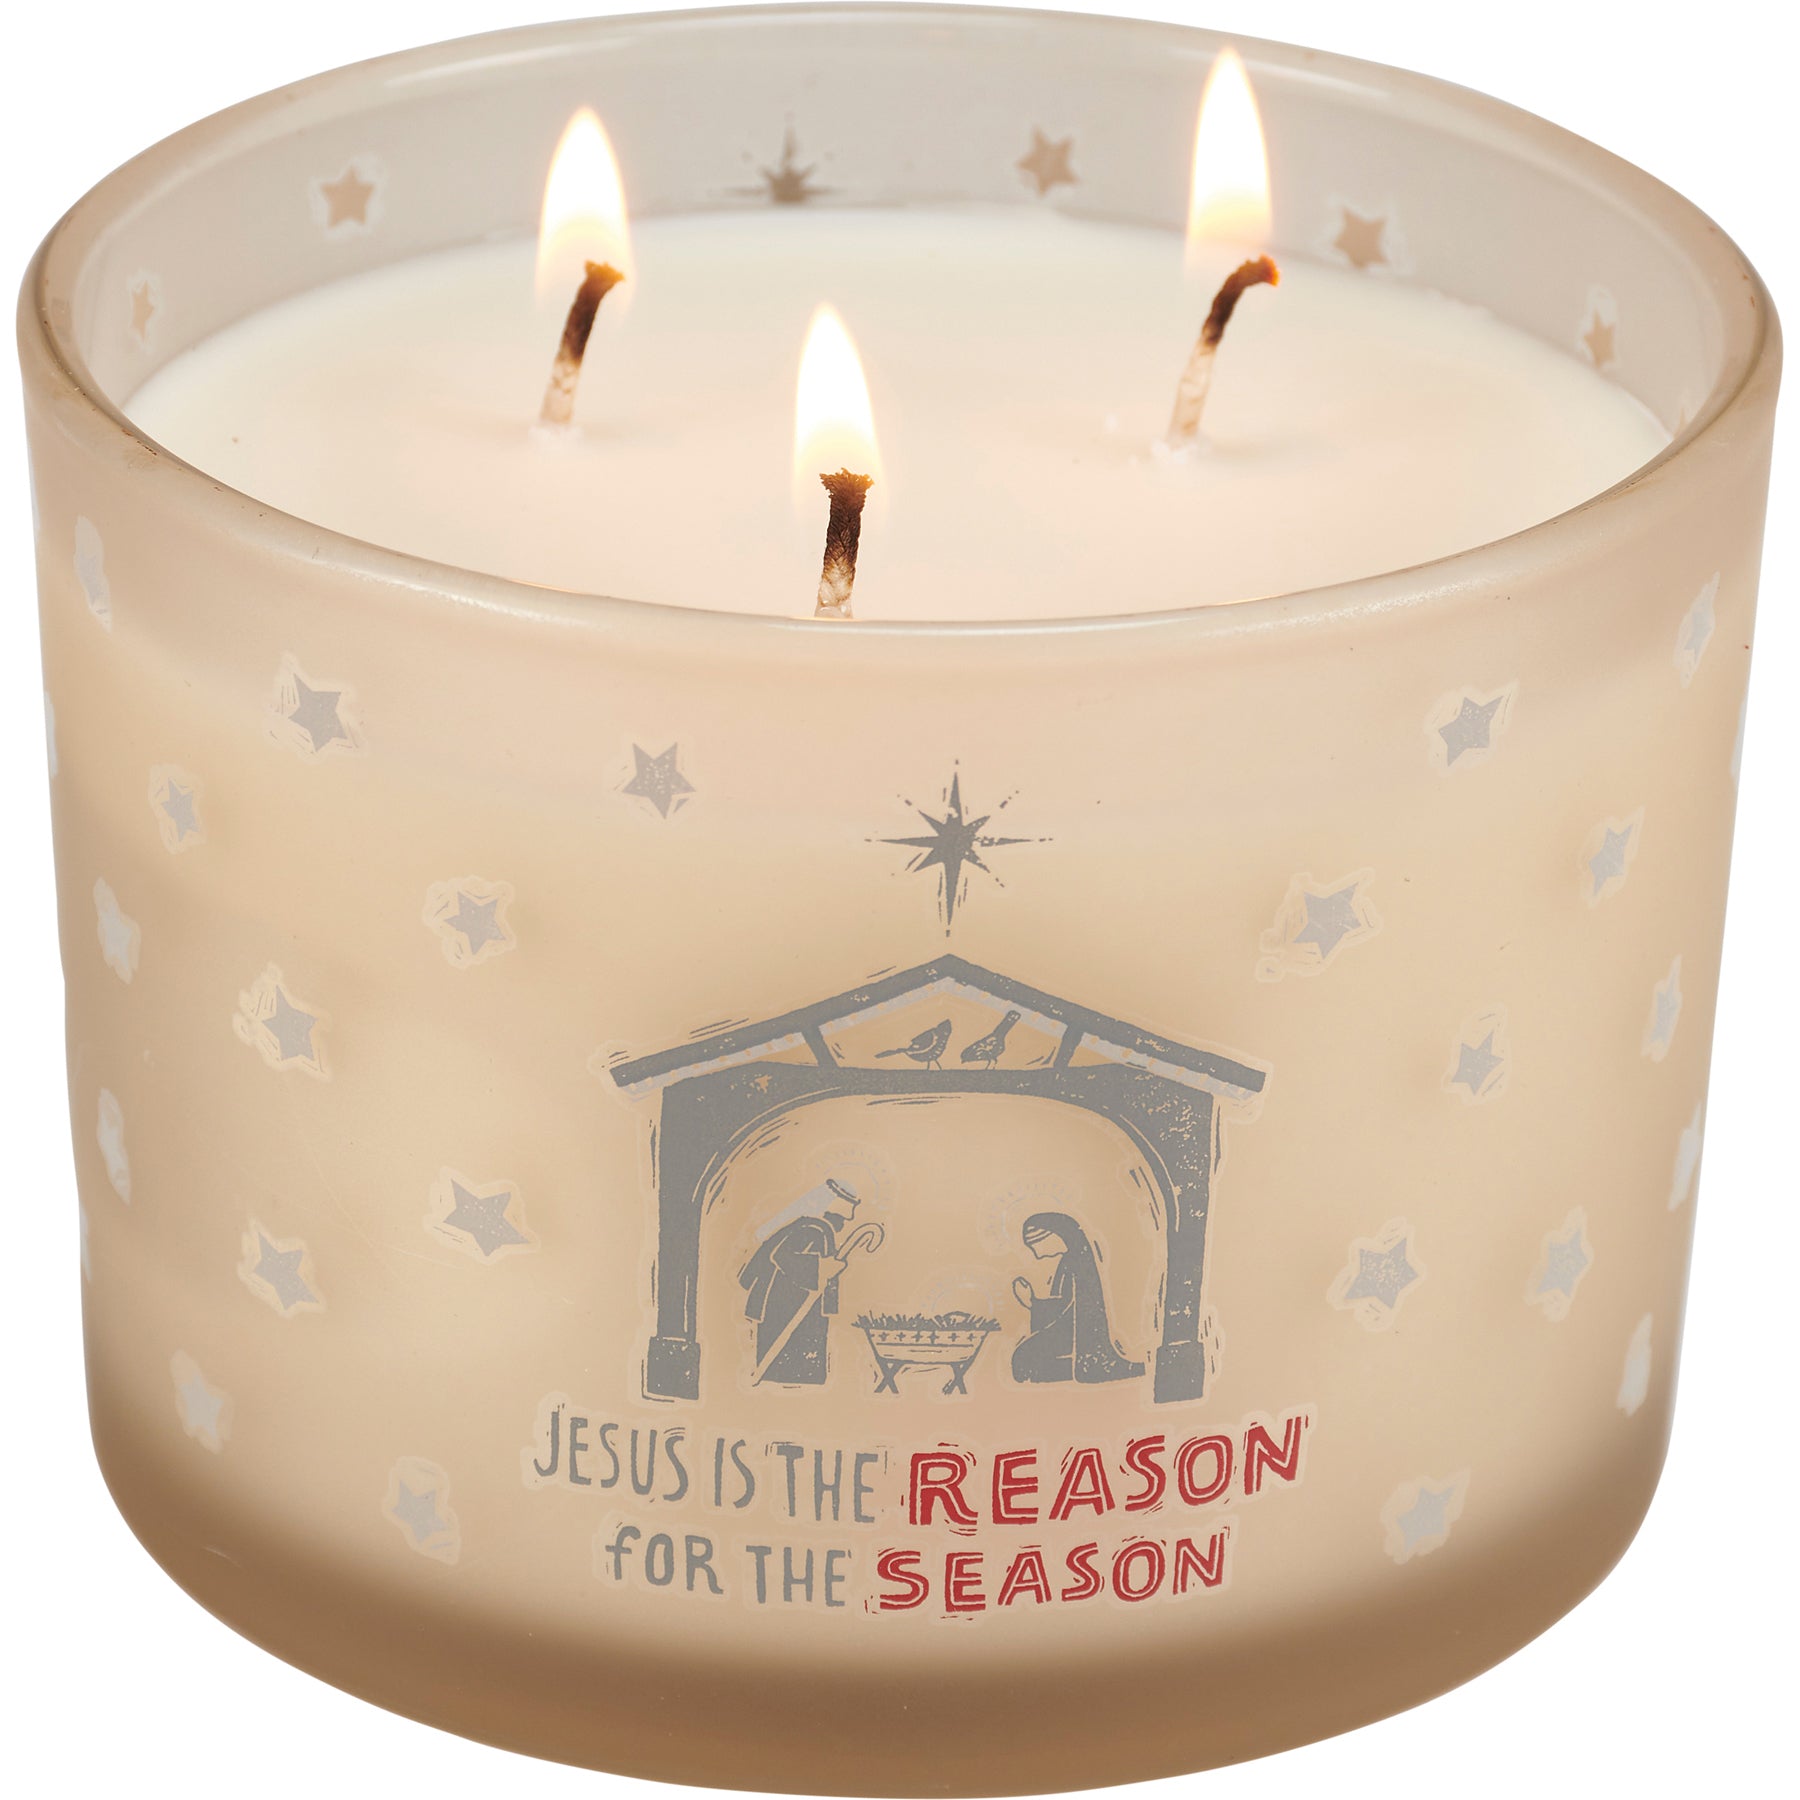 JESUS IS THE REASON JAR CANDLE